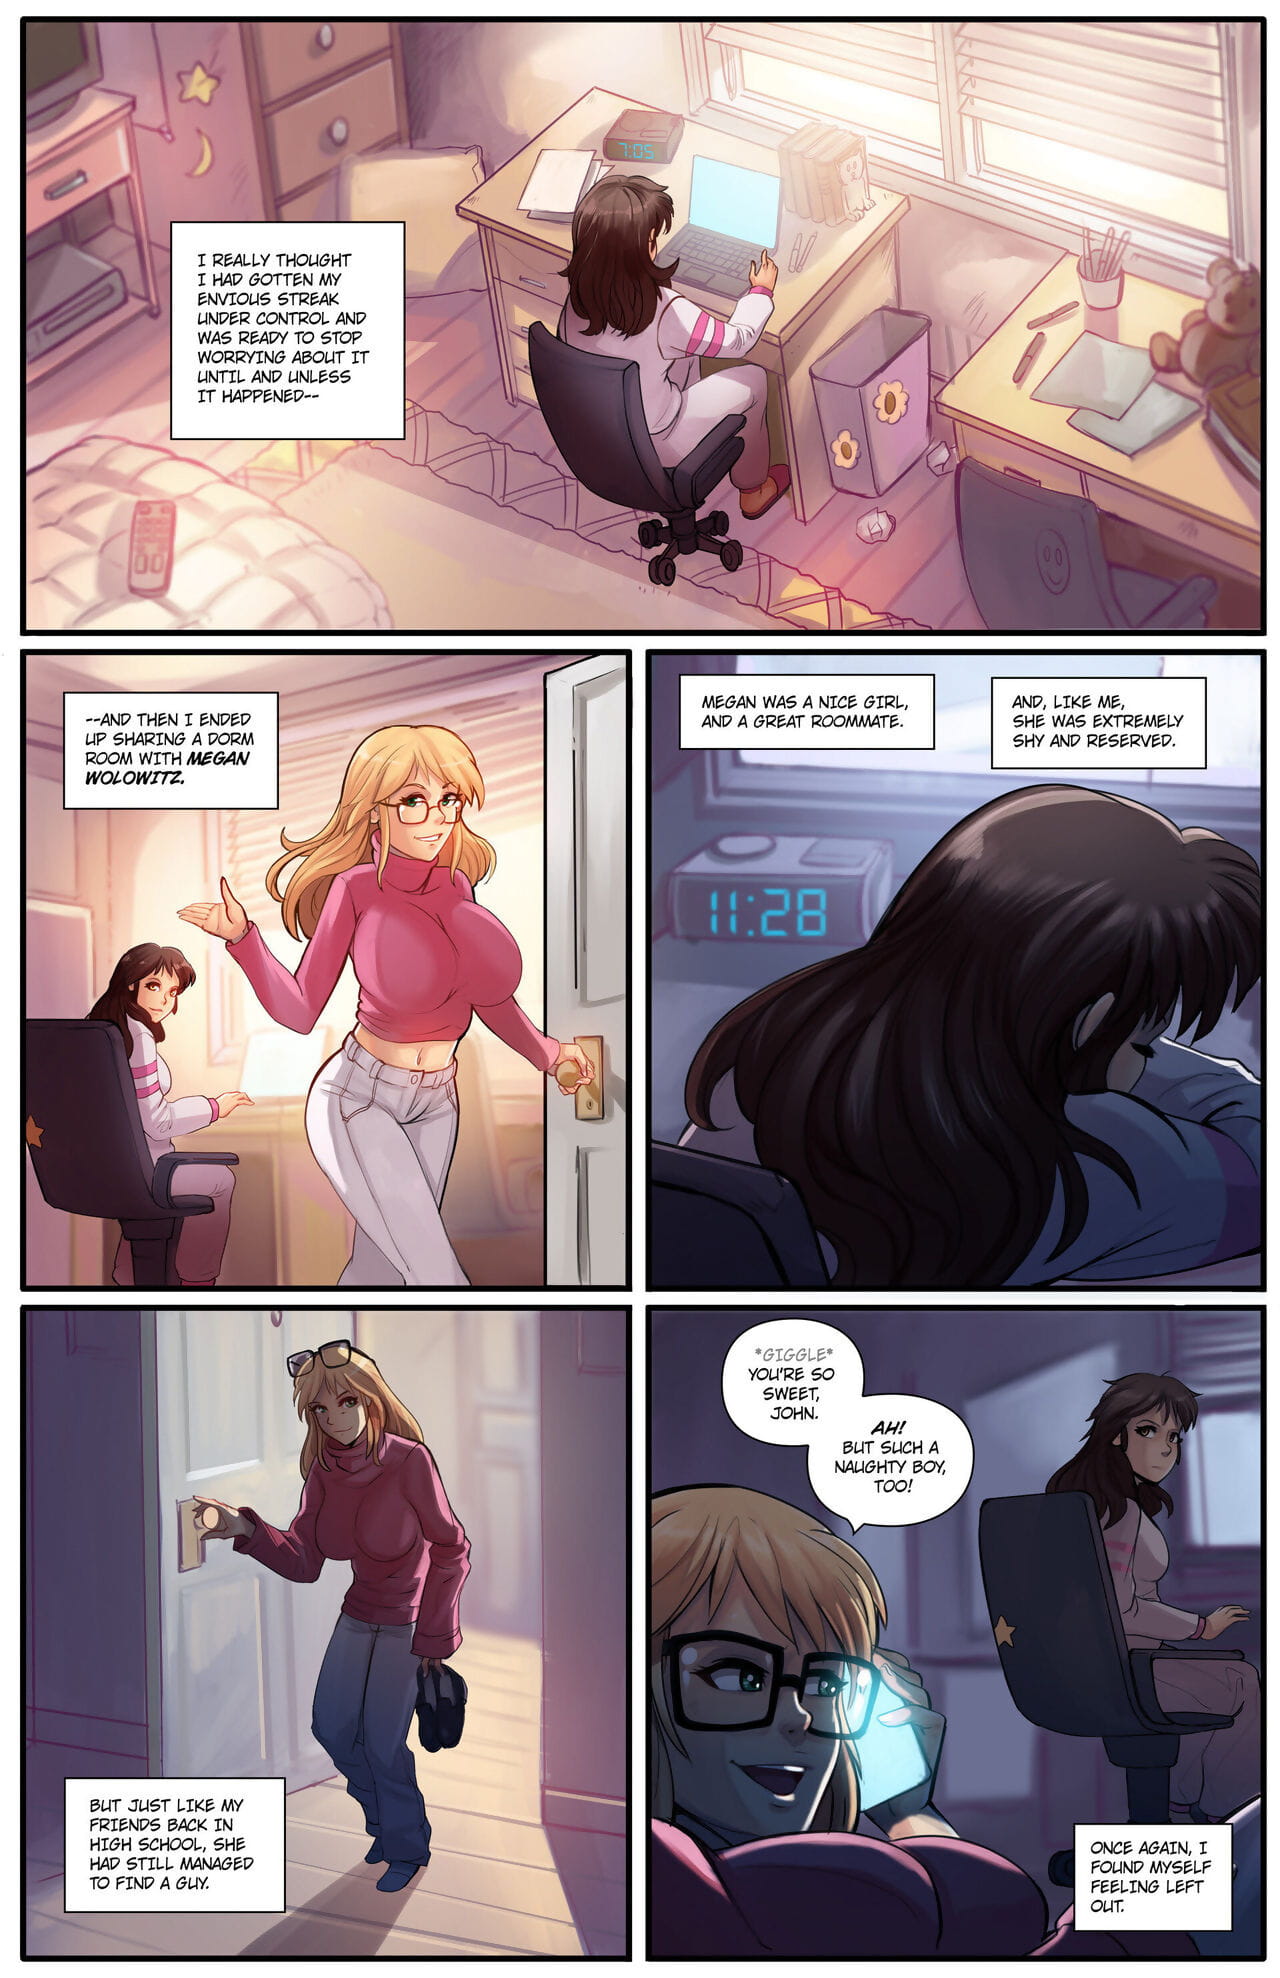 shrink fan– el Invisible Chica page 1